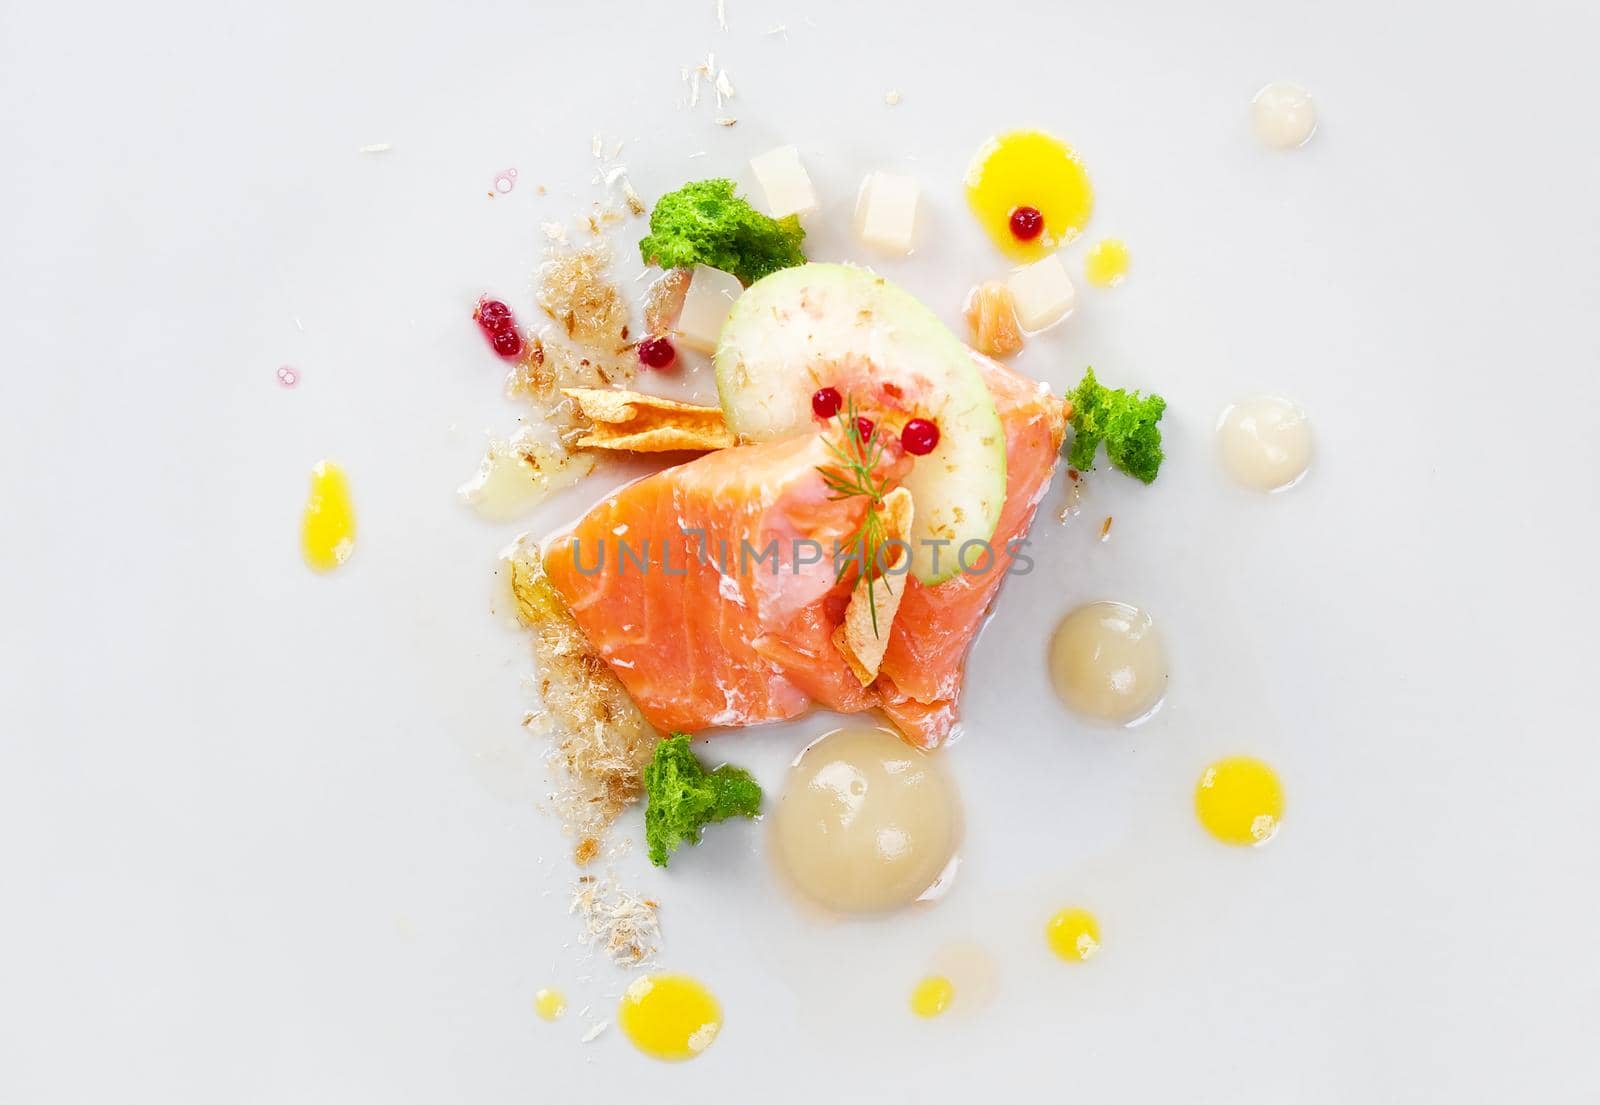 Molecular modern cuisine red fish in a dish with beautiful garnish close up. Isolated